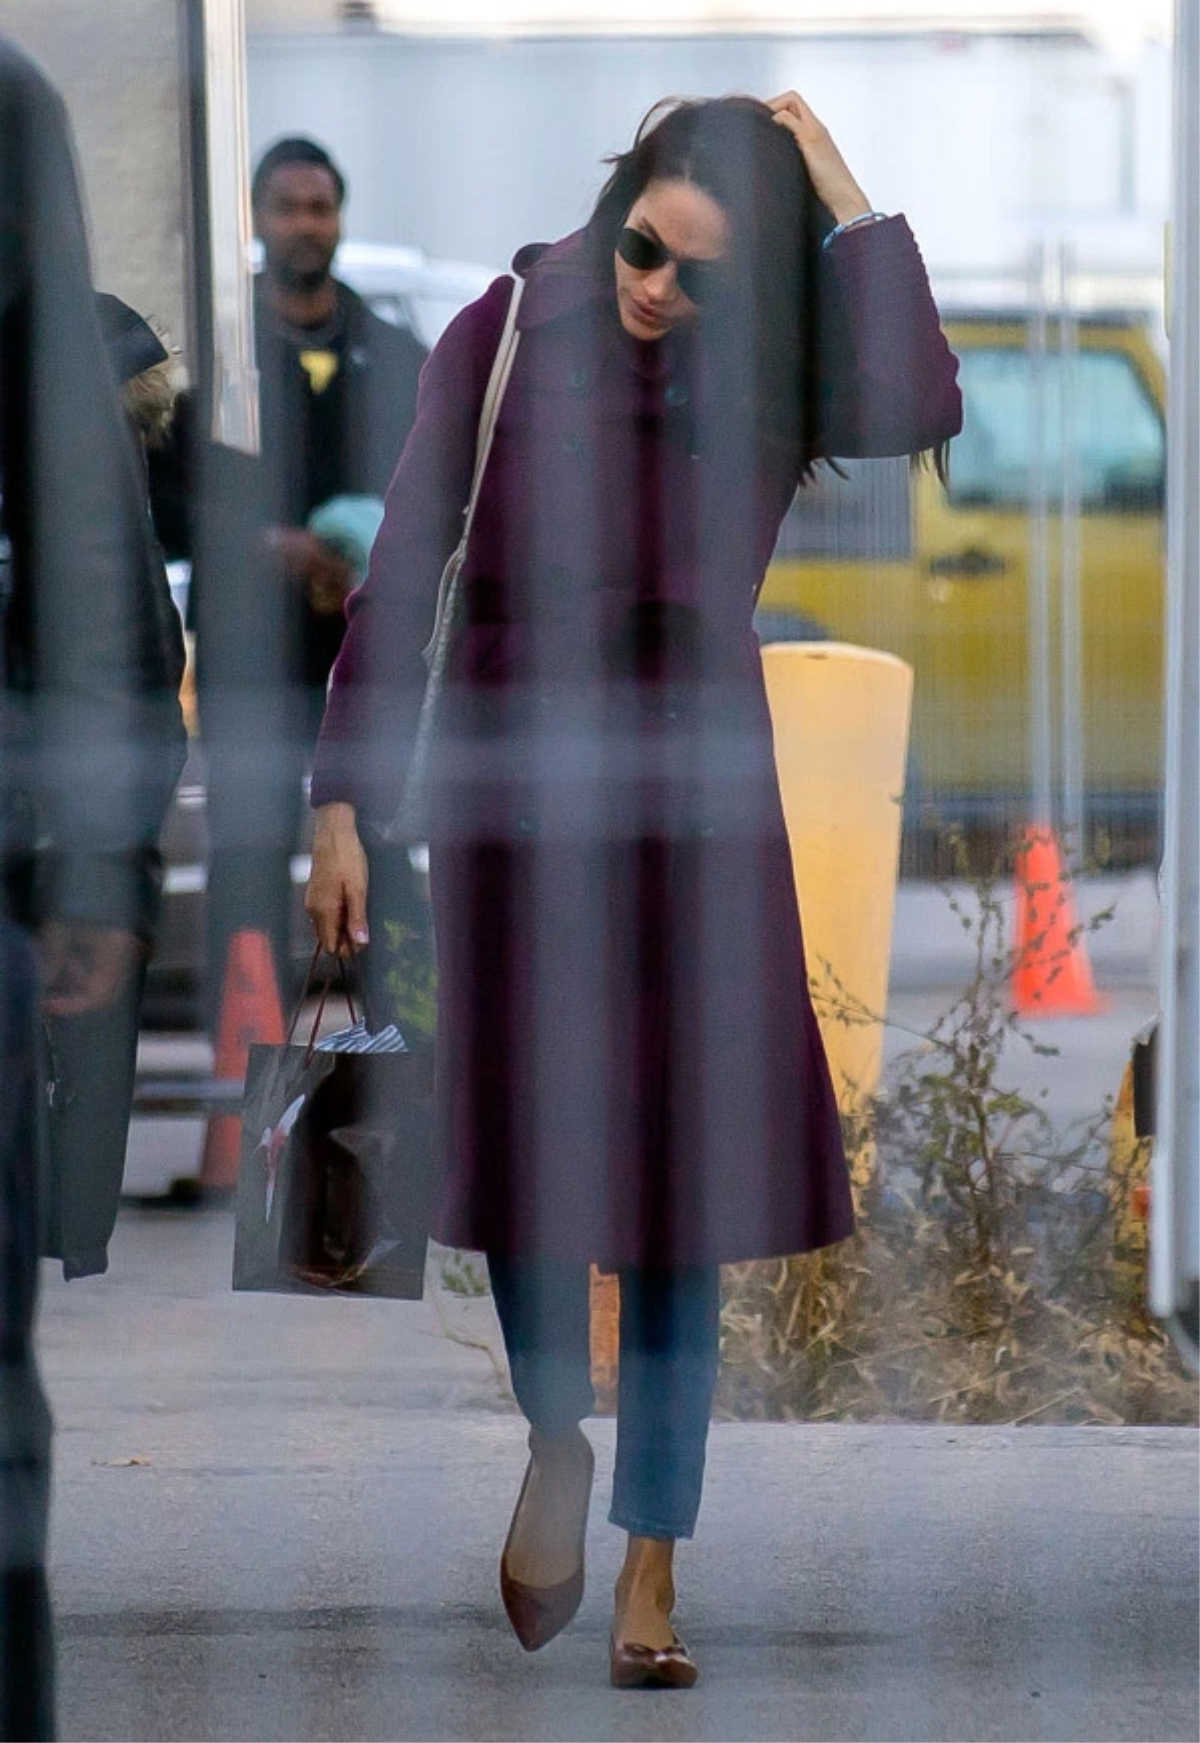 Meghan Steps out on Set of Suits - Meghan's Mirror